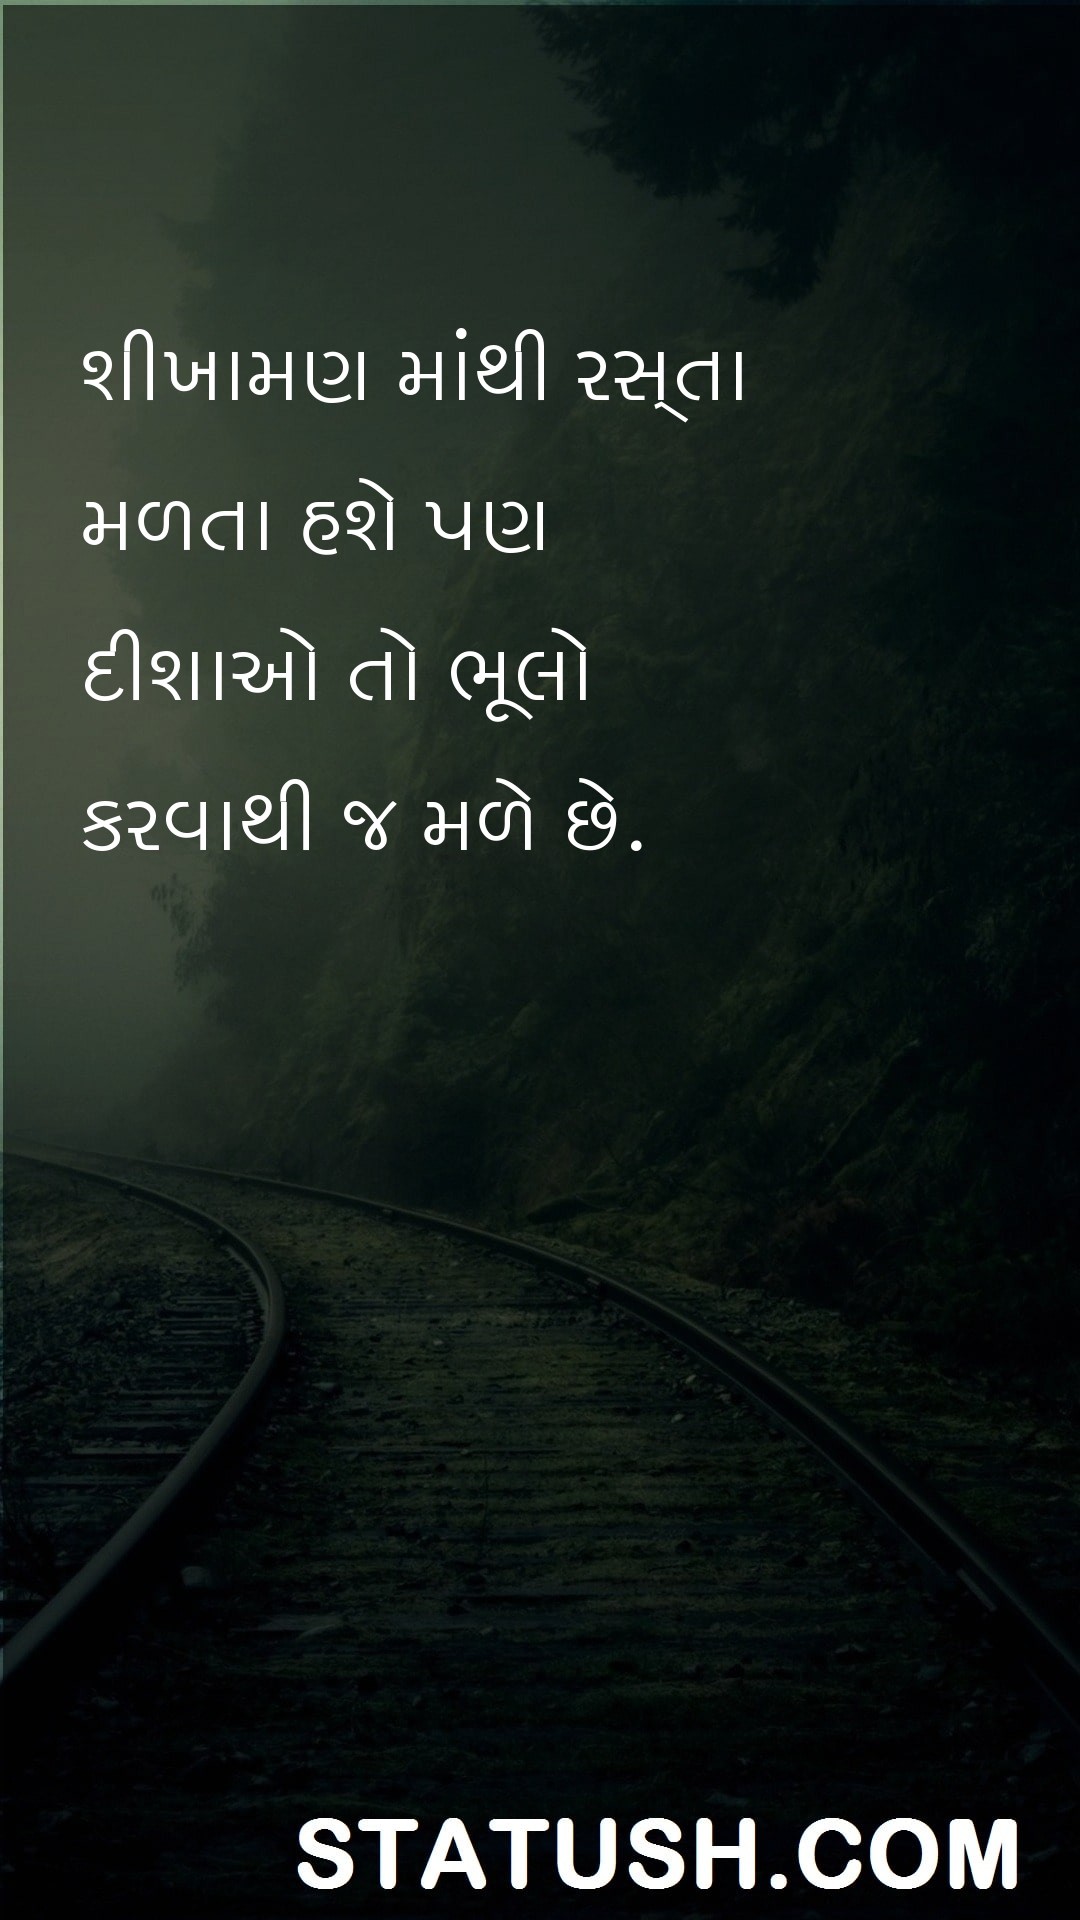 Roads can be obtained from the shikhaman - Gujarati Quotes at statush.com